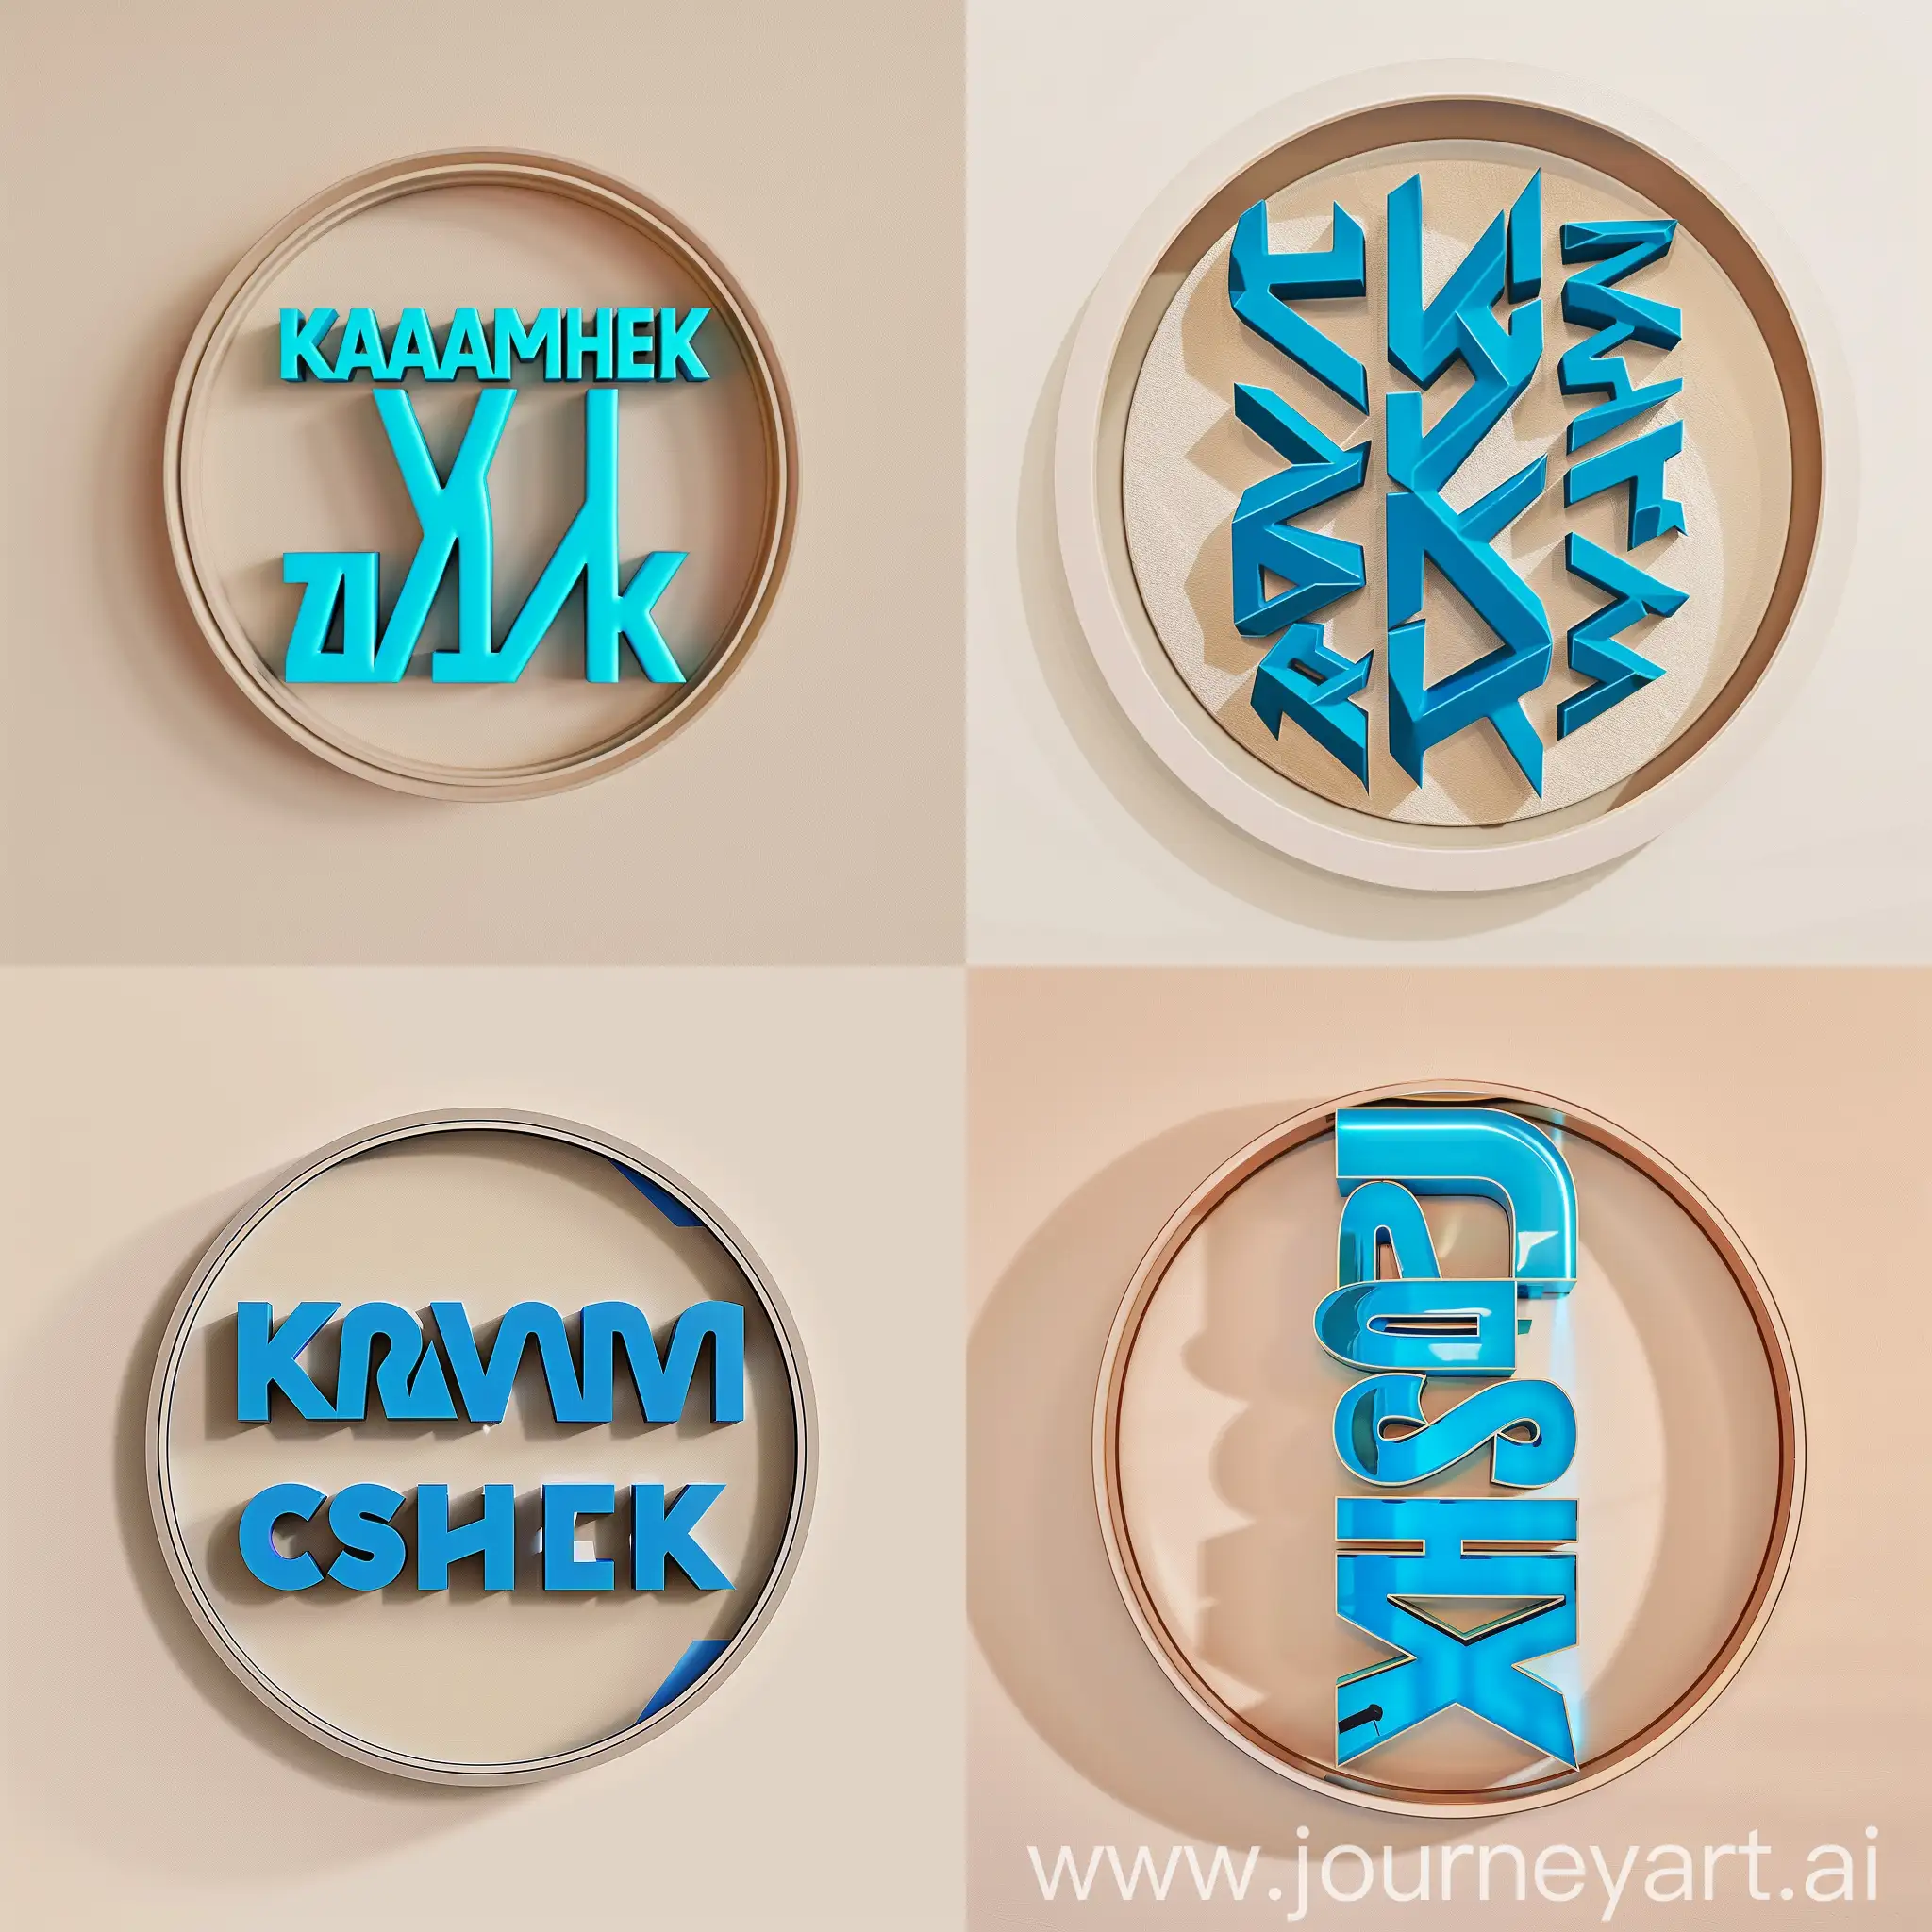 The photo shows a vertical logo in a round frame with the text "karamshek" on a light beige background. The text is in bold, playful blue font. The letters are arranged in a non-standard way, giving the impression of three-dimensionality and volume